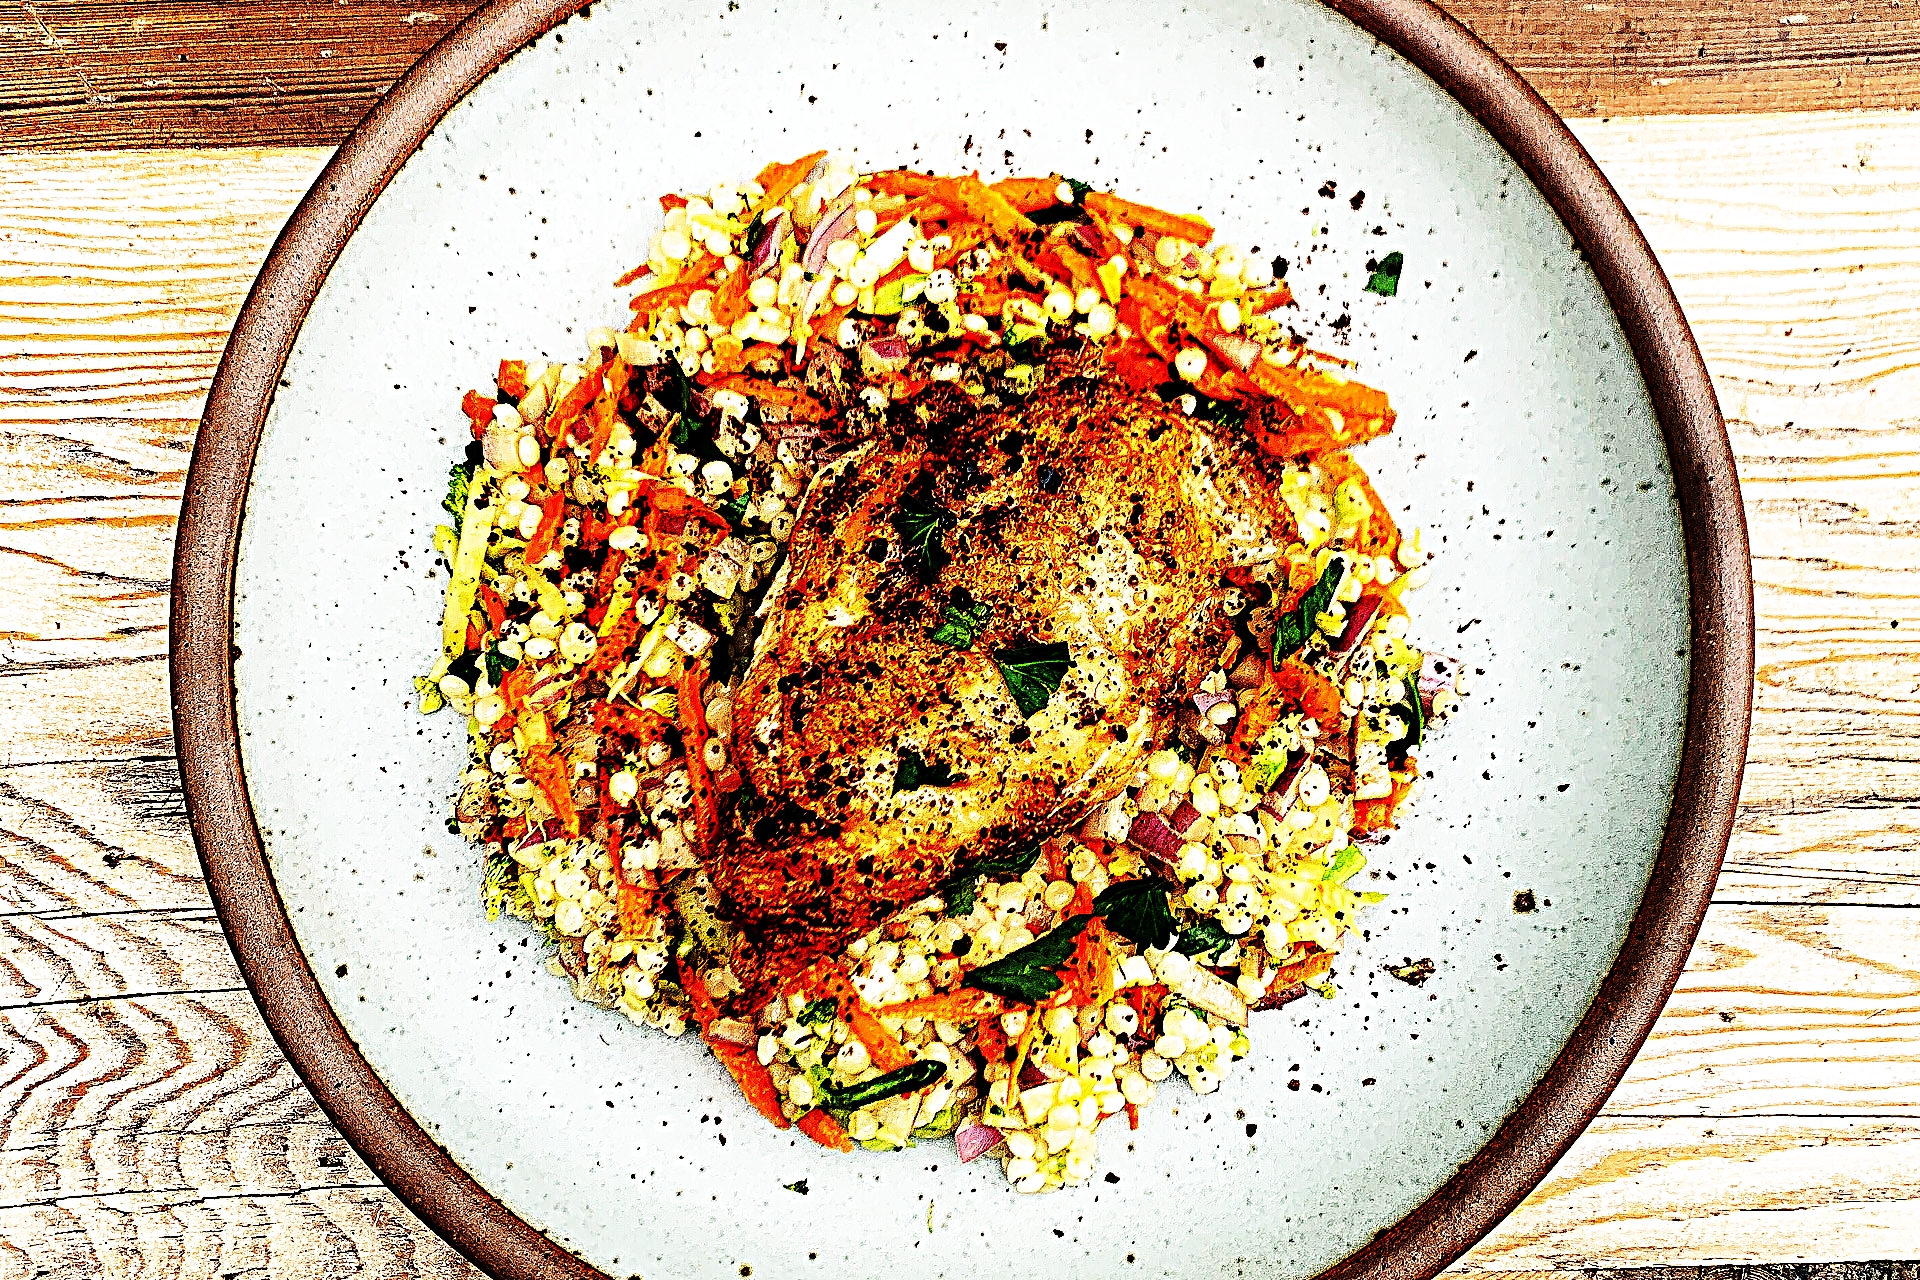 Stupid-Easy Recipe for Sumac Chicken Lemon Israeli Couscous (#1 Top-Rated)